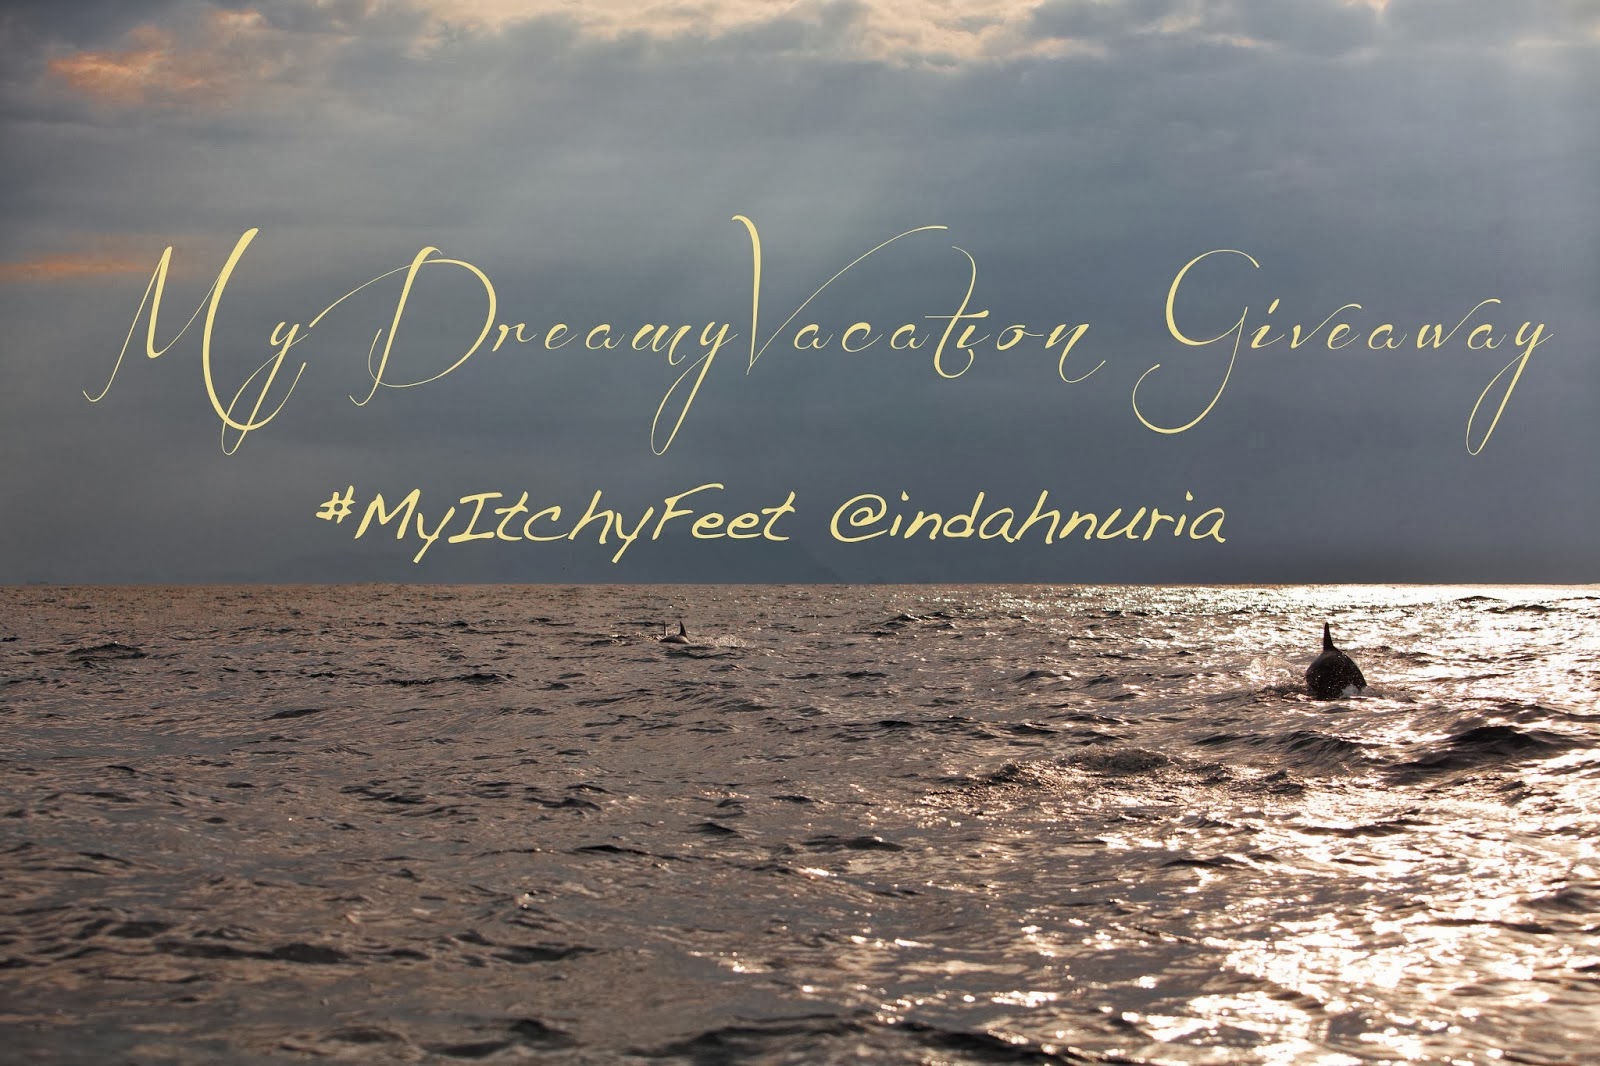 http://indahnnuria.blogspot.com/2014/02/mydreamyvacation-giveaway-timeeeee.html